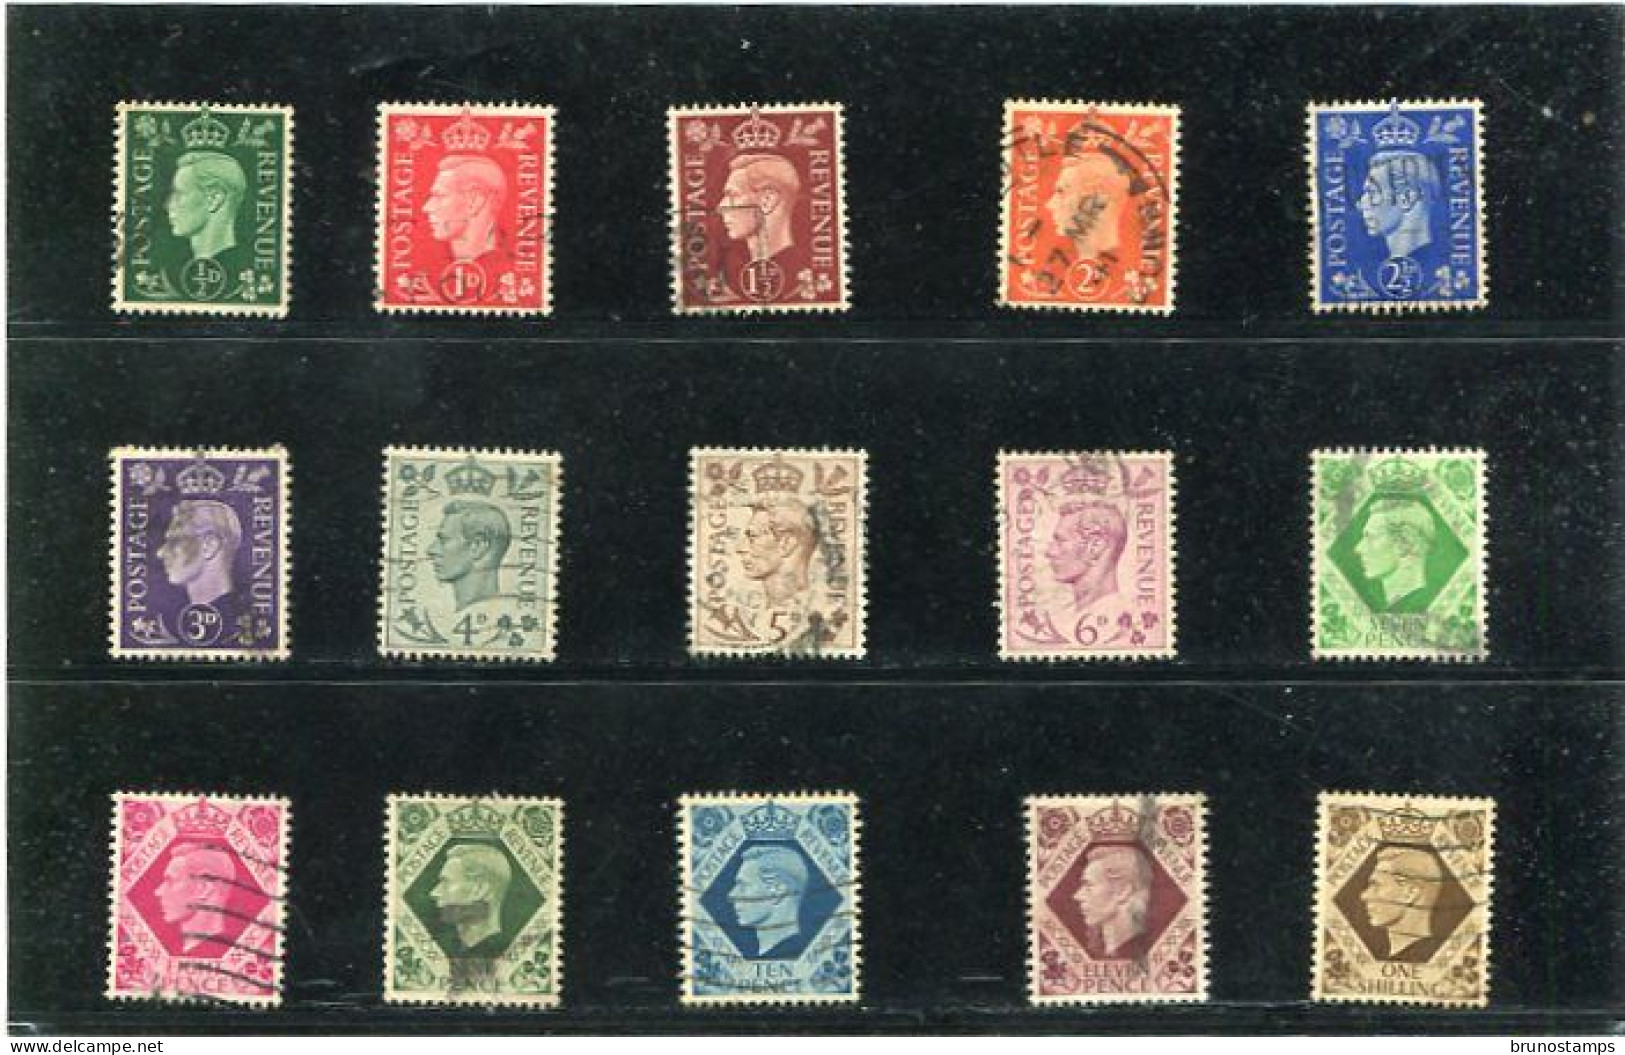 GREAT BRITAIN - 1937-47  KGVI DARK COLOURS   SET  FINE USED - Used Stamps